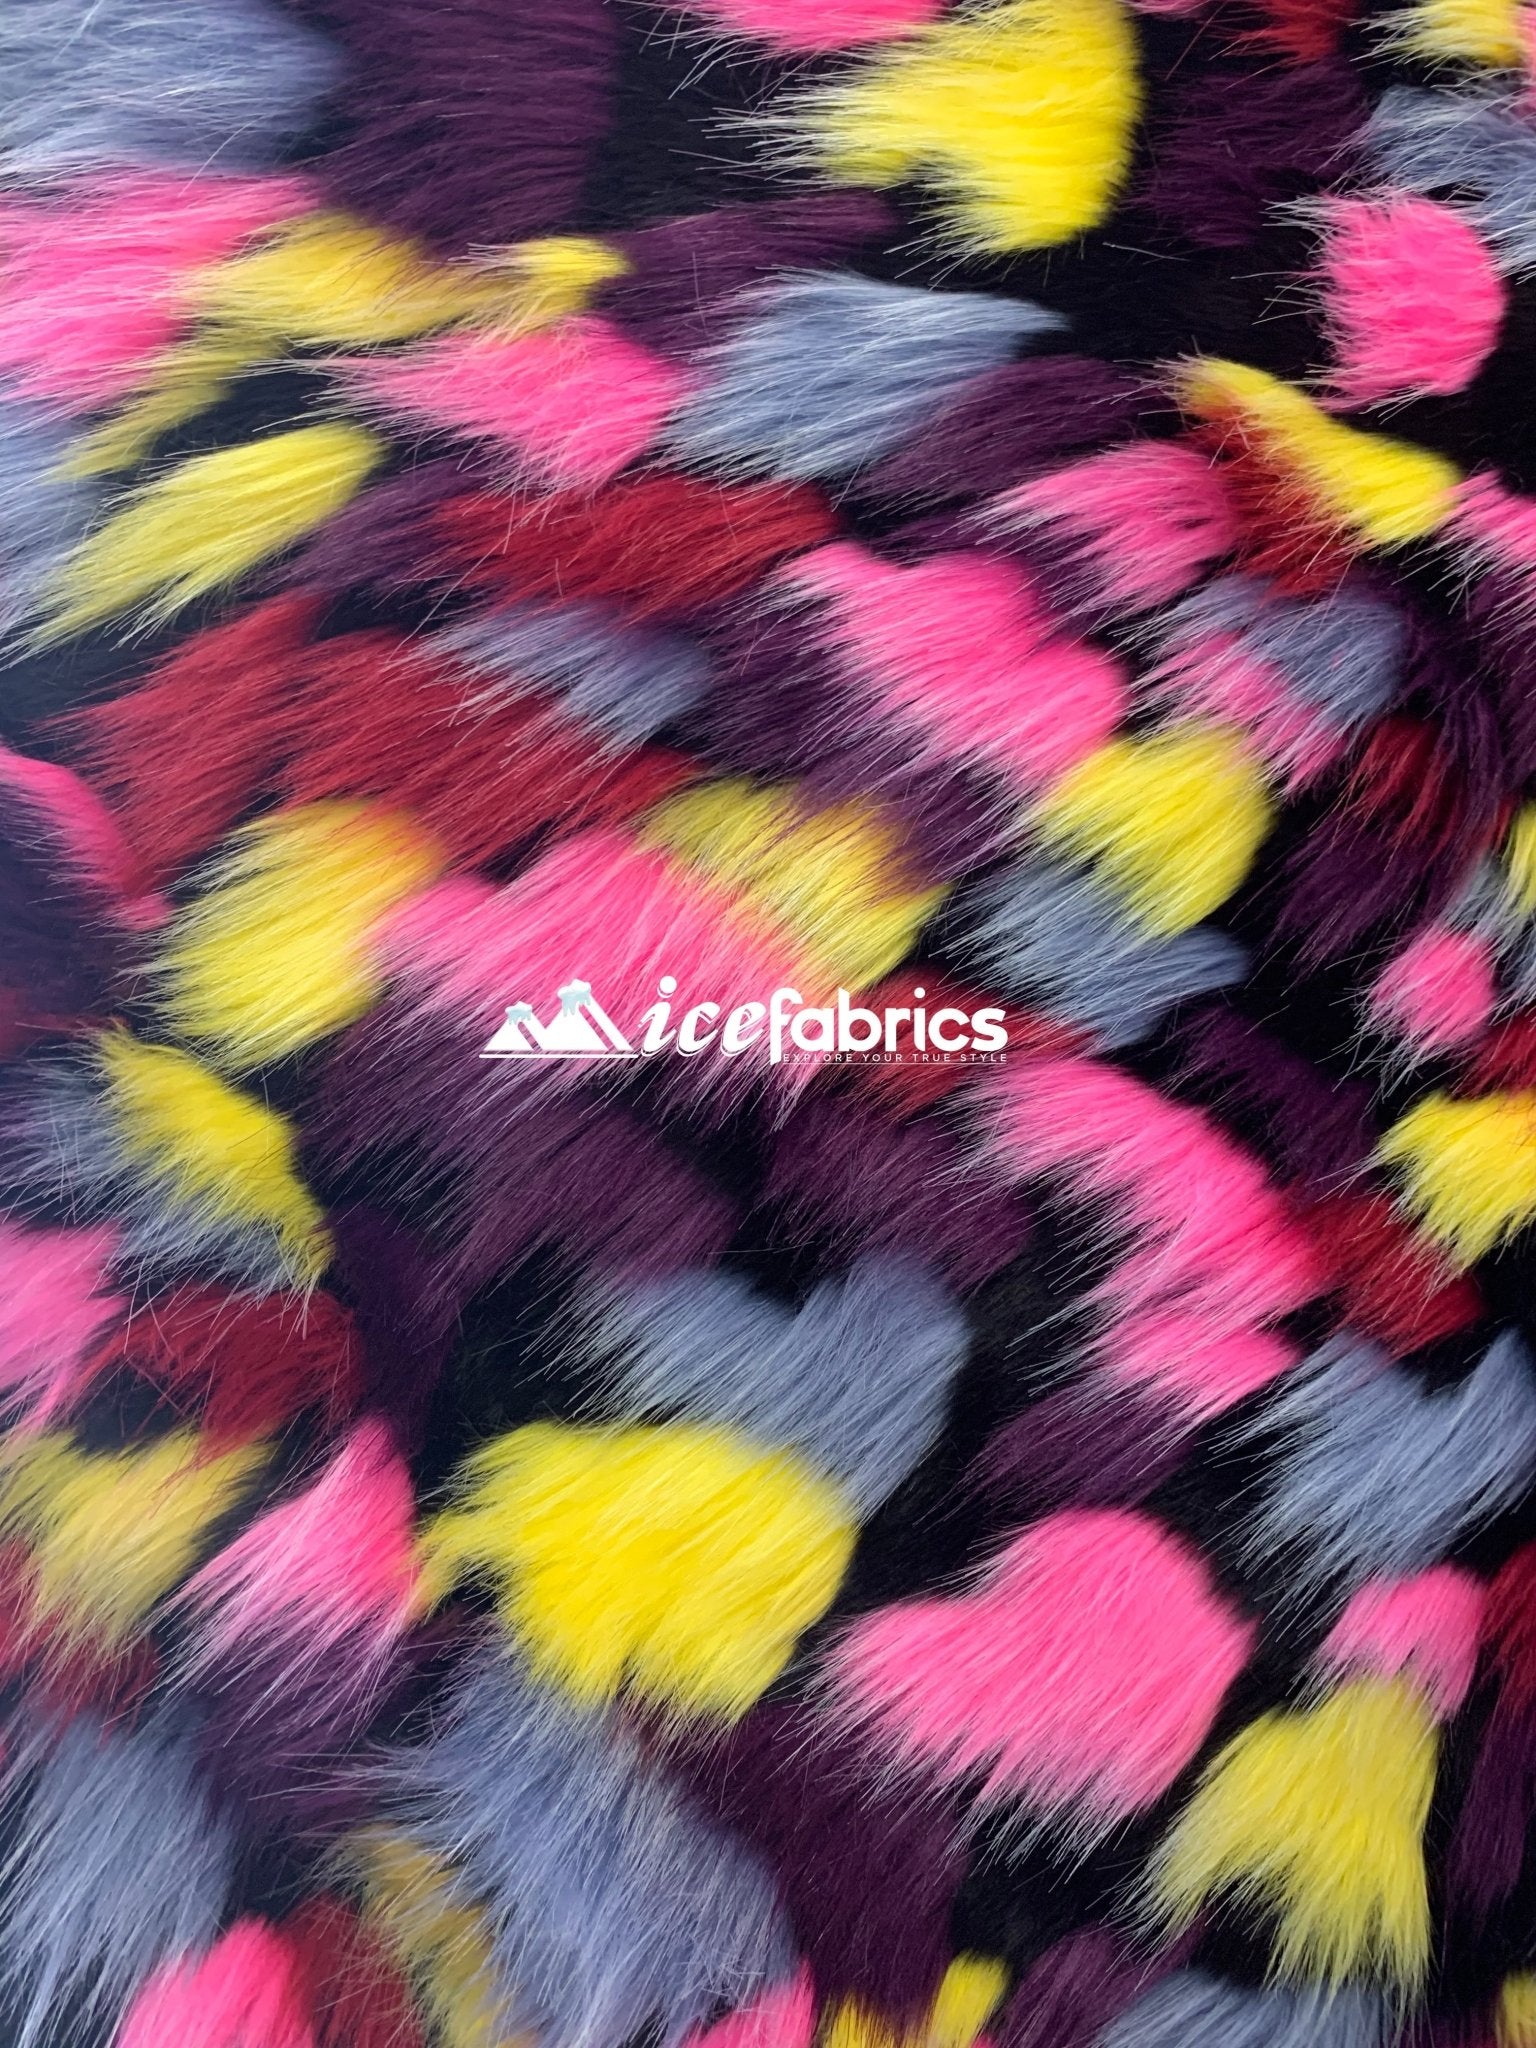 Multi-Color Animal Fake Faux Fur Fabric By The YardICEFABRICICE FABRICSYellow Pink BurgundyBy The Yard (60 inches Wide)Multi-Color Animal Fake Faux Fur Fabric By The Yard ICEFABRIC Yellow Pink Burgundy